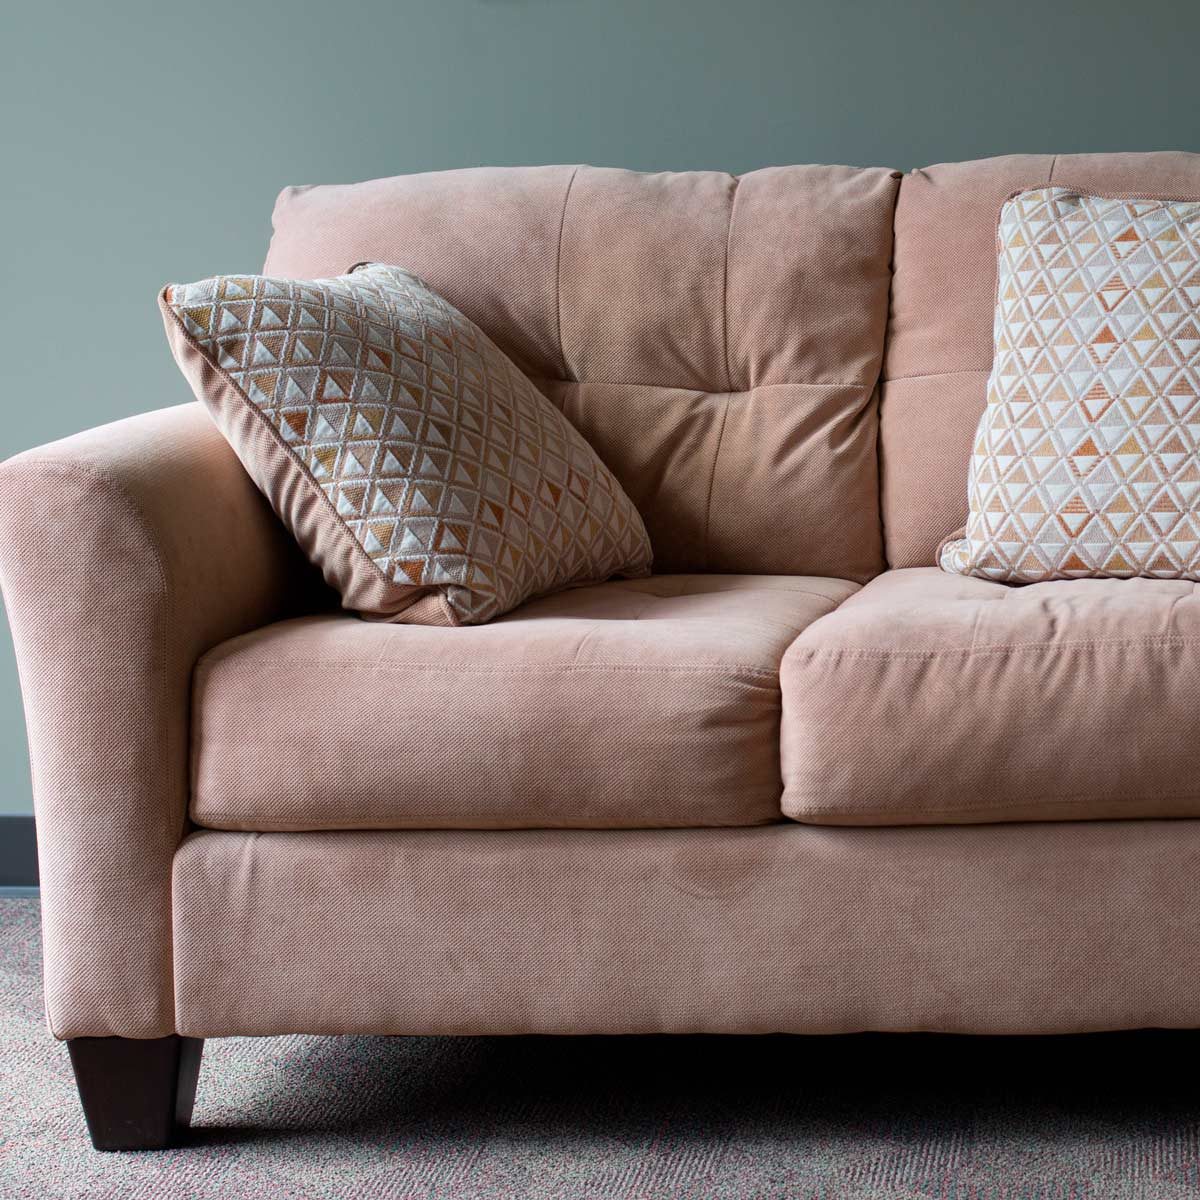 How to Clean a Microfiber Couch  Family Handyman